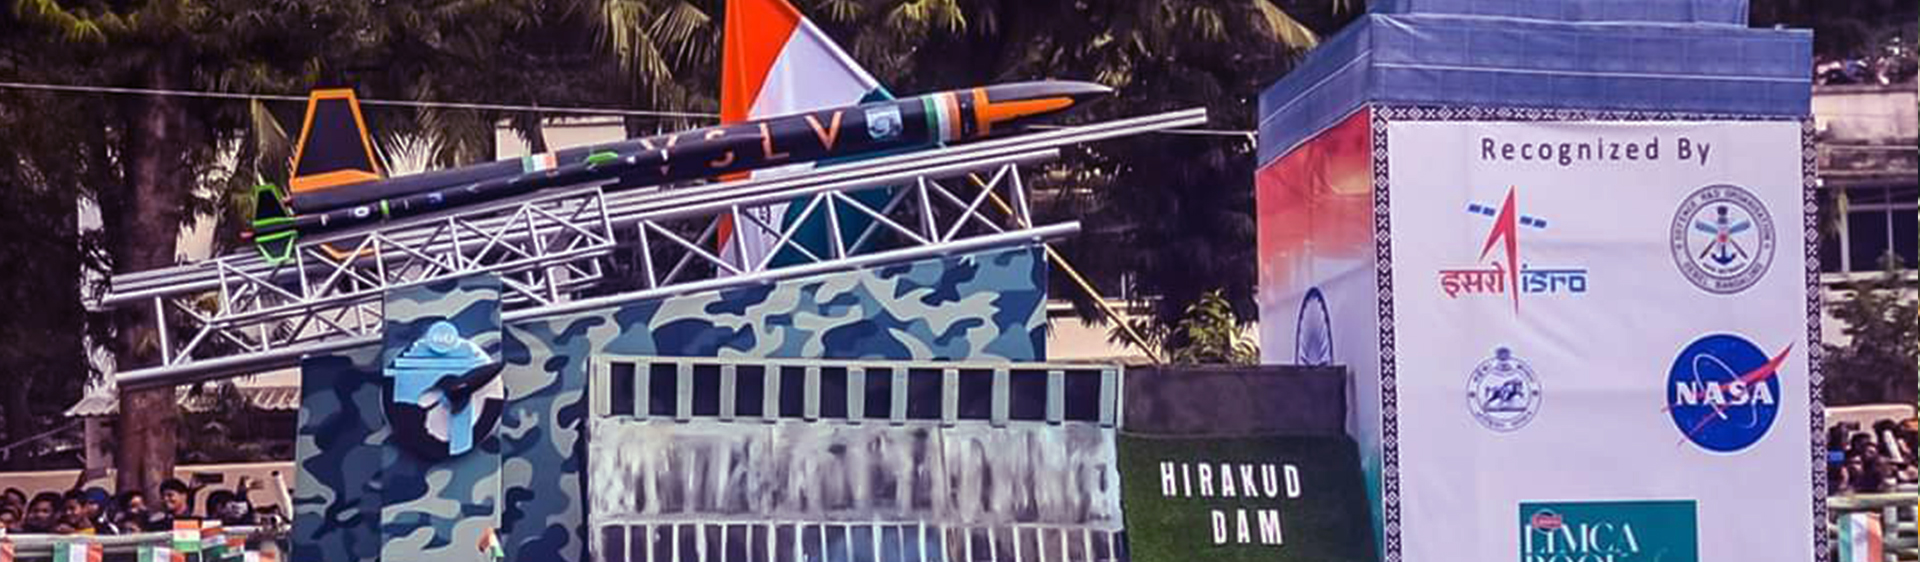 A Tableau  with a Rocket on display at the Republic Day Parade in Bhubaneswar on Saturday